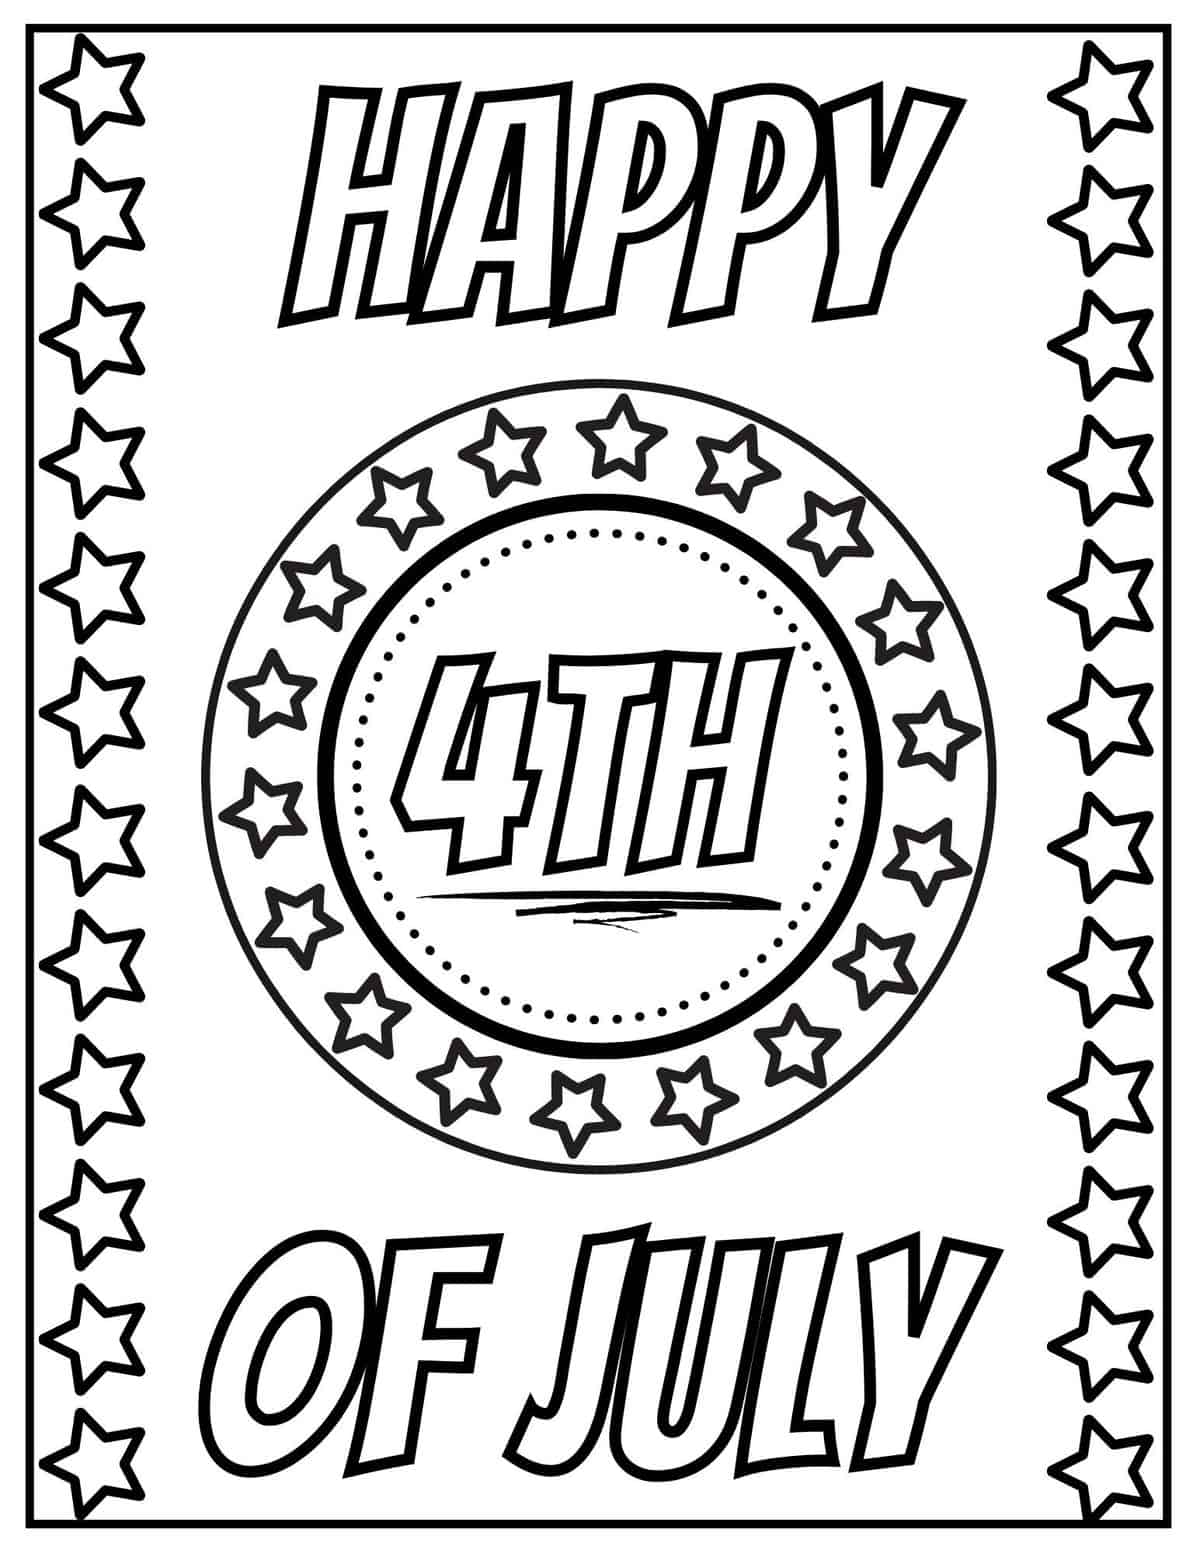 happy 4th of July coloring page with a star border